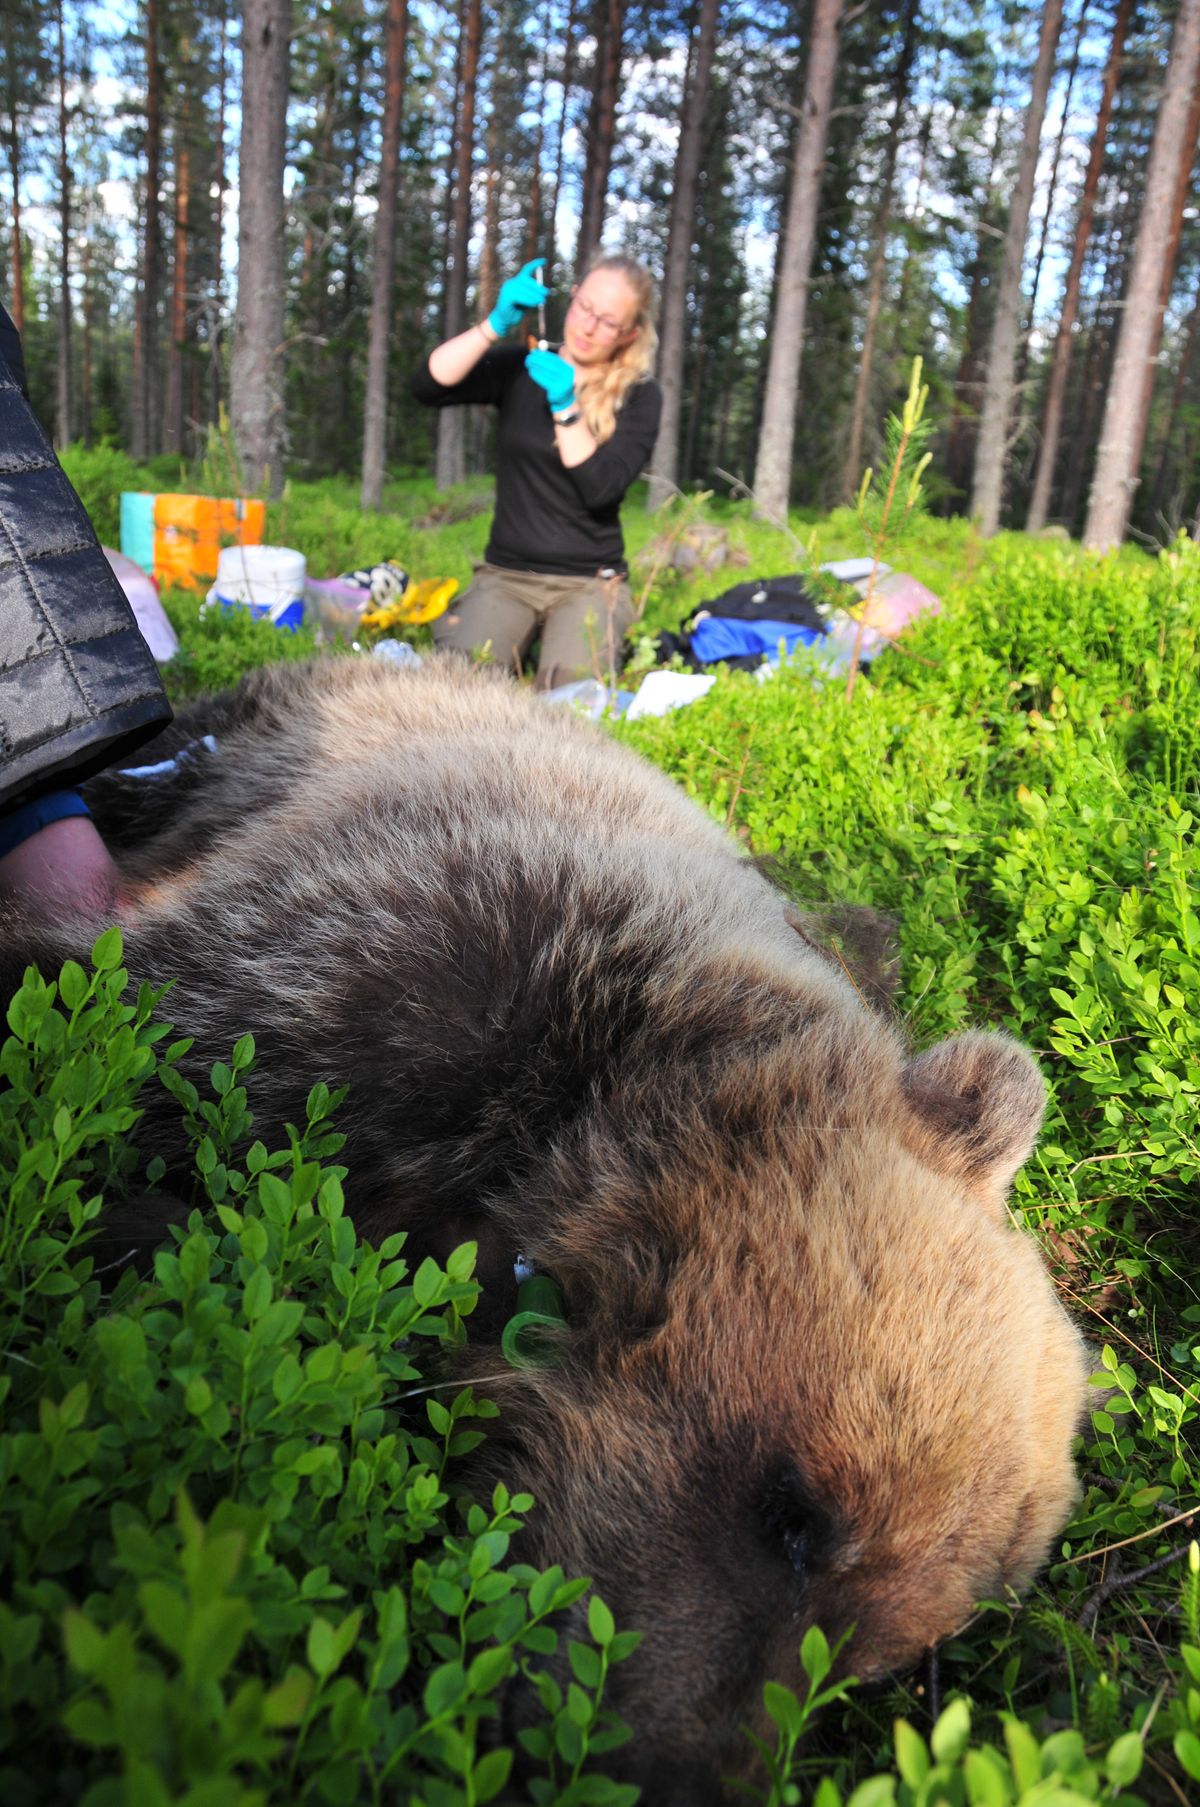 Brown bear anesthetized in the woods while scientist works in the background